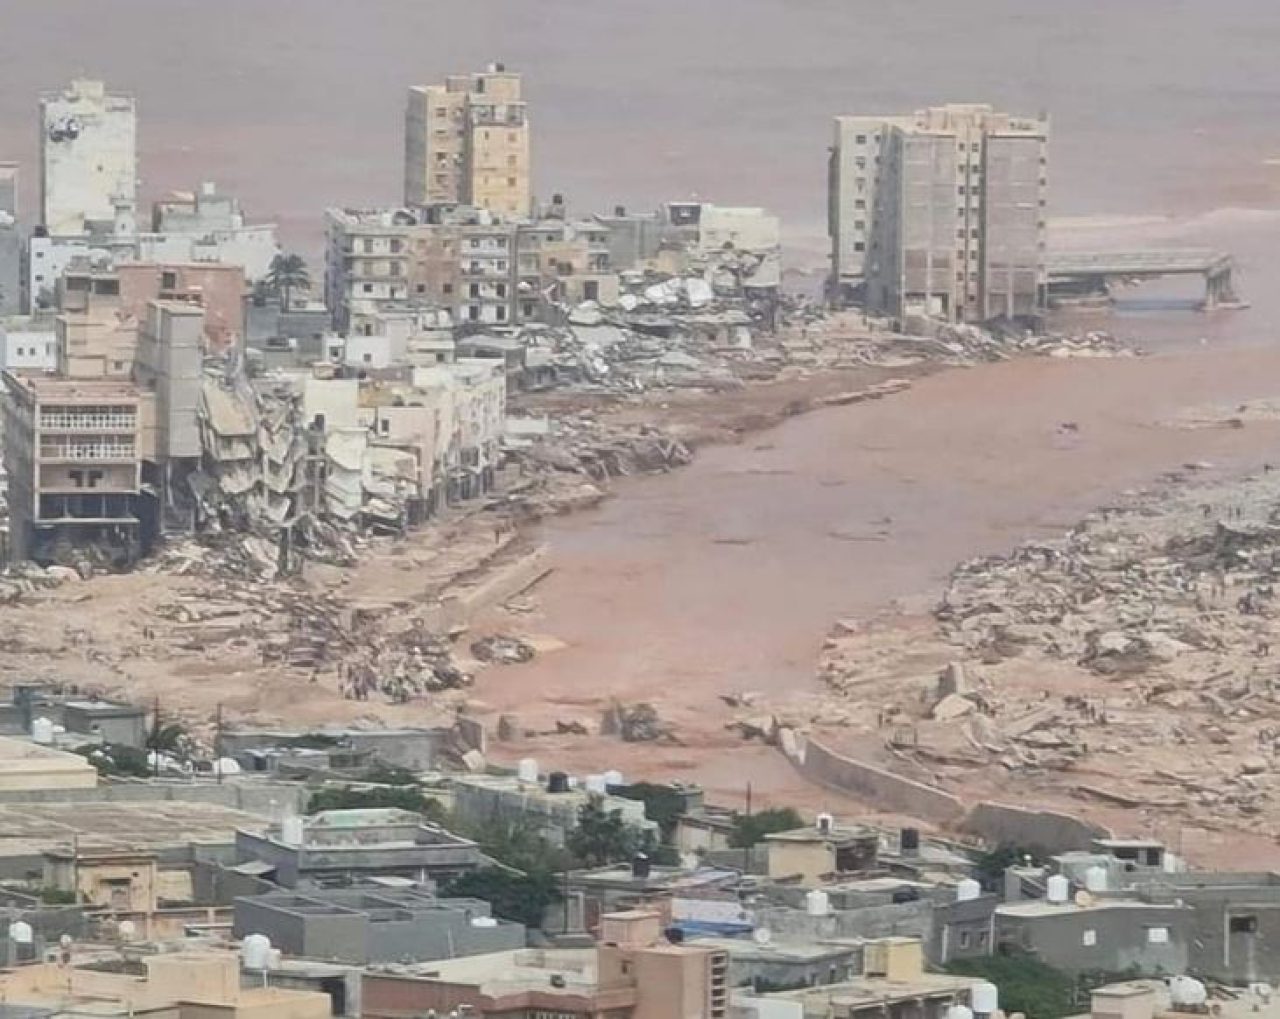 Libya Floods: Thousands Dead, Thousands More Missing. Afro News Wire